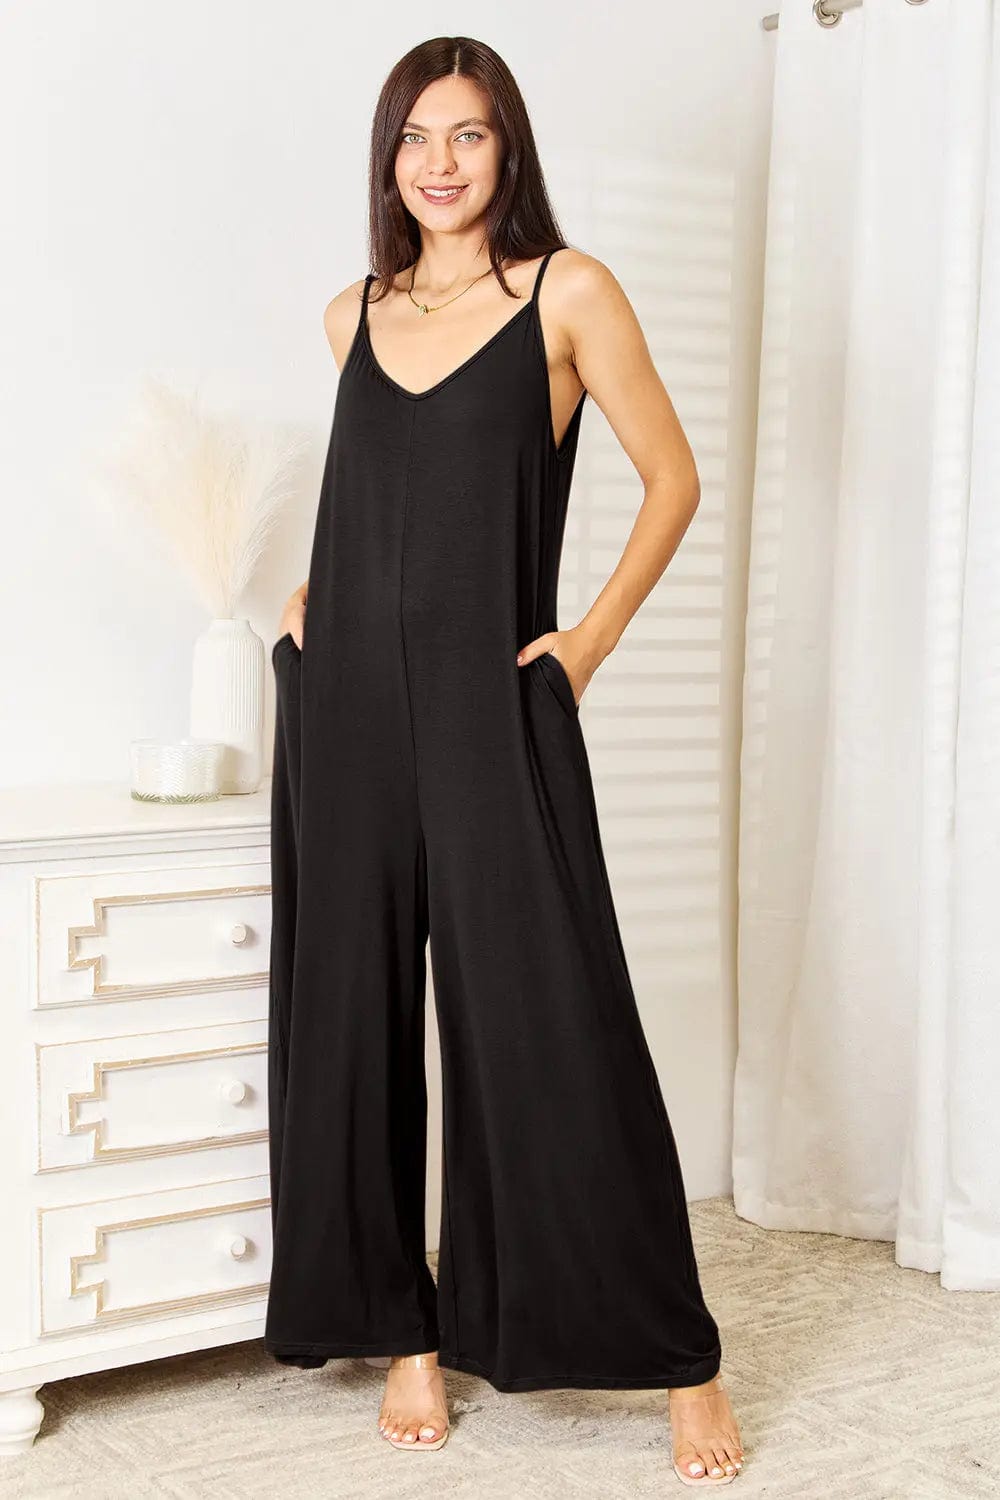 Double Take Full Size Soft Rayon Spaghetti Strap Tied Wide Leg Jumpsuit   MPGD Corp Merchandise